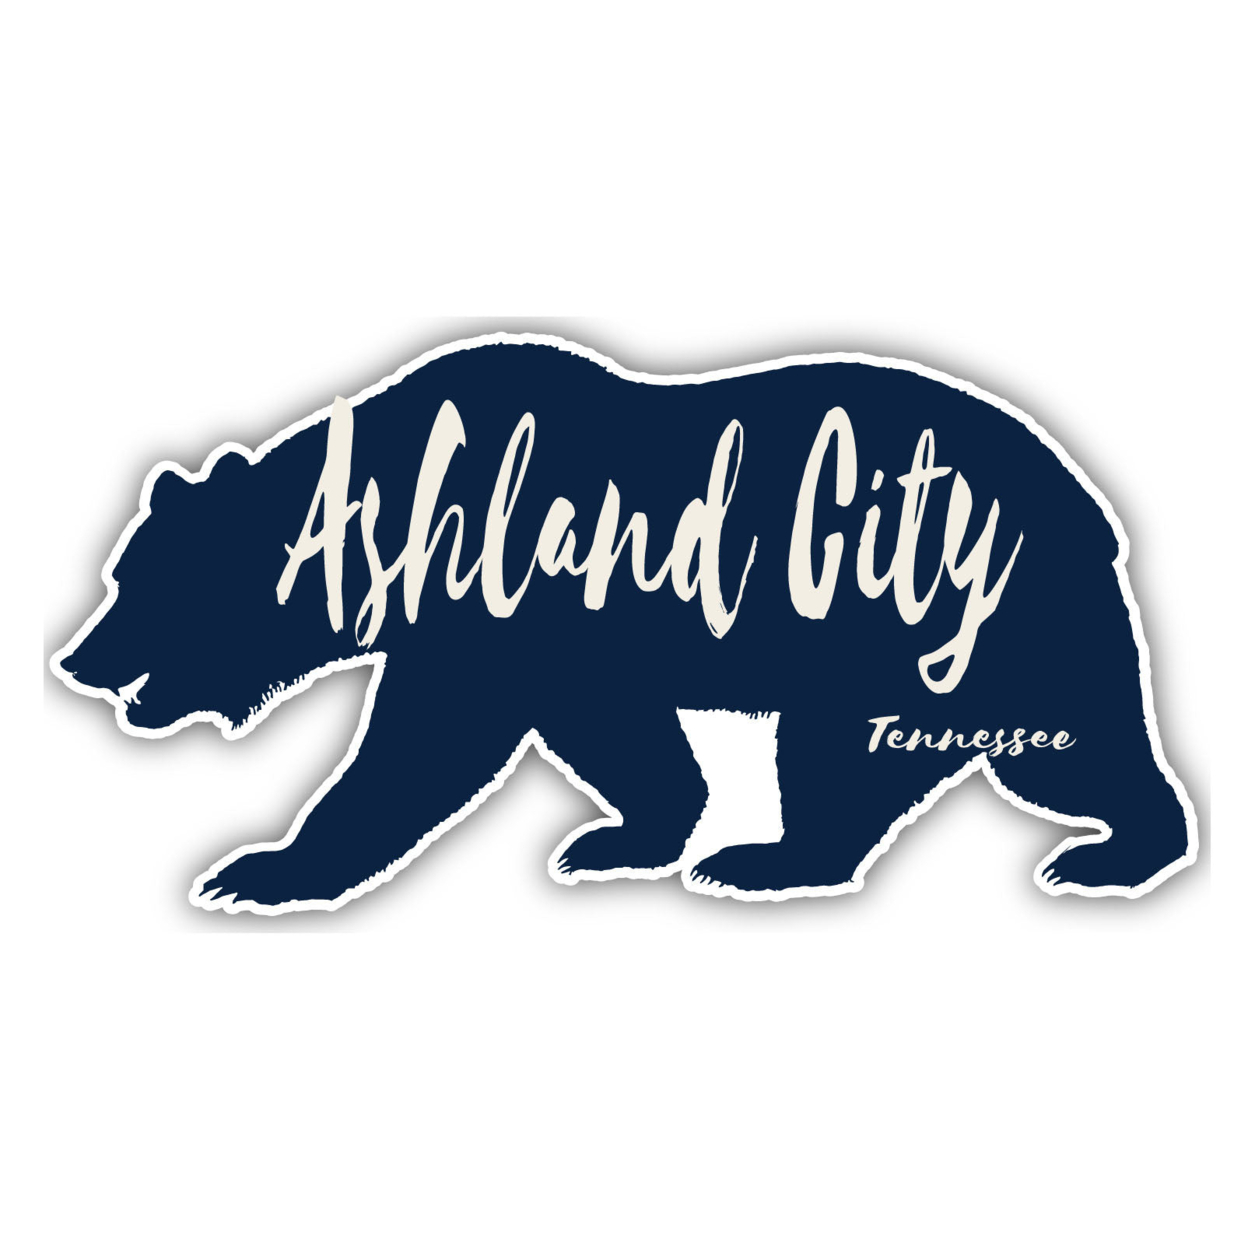 Ashland City Tennessee Souvenir Decorative Stickers (Choose Theme And Size) - 4-Pack, 2-Inch, Bear